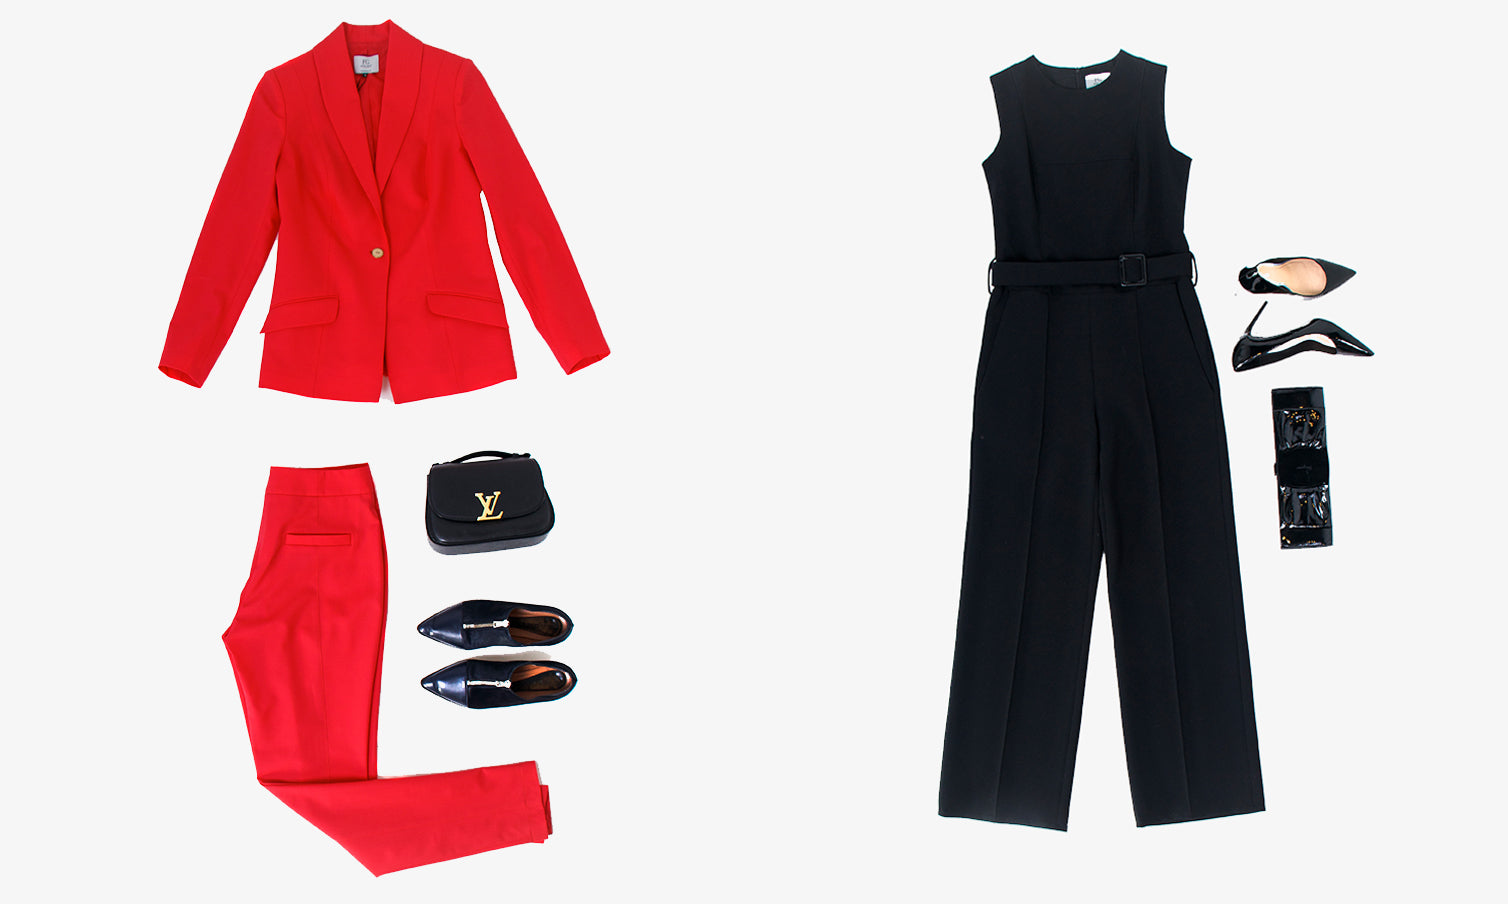 Office party: 7 office-appropriate & elegant outfit ideas